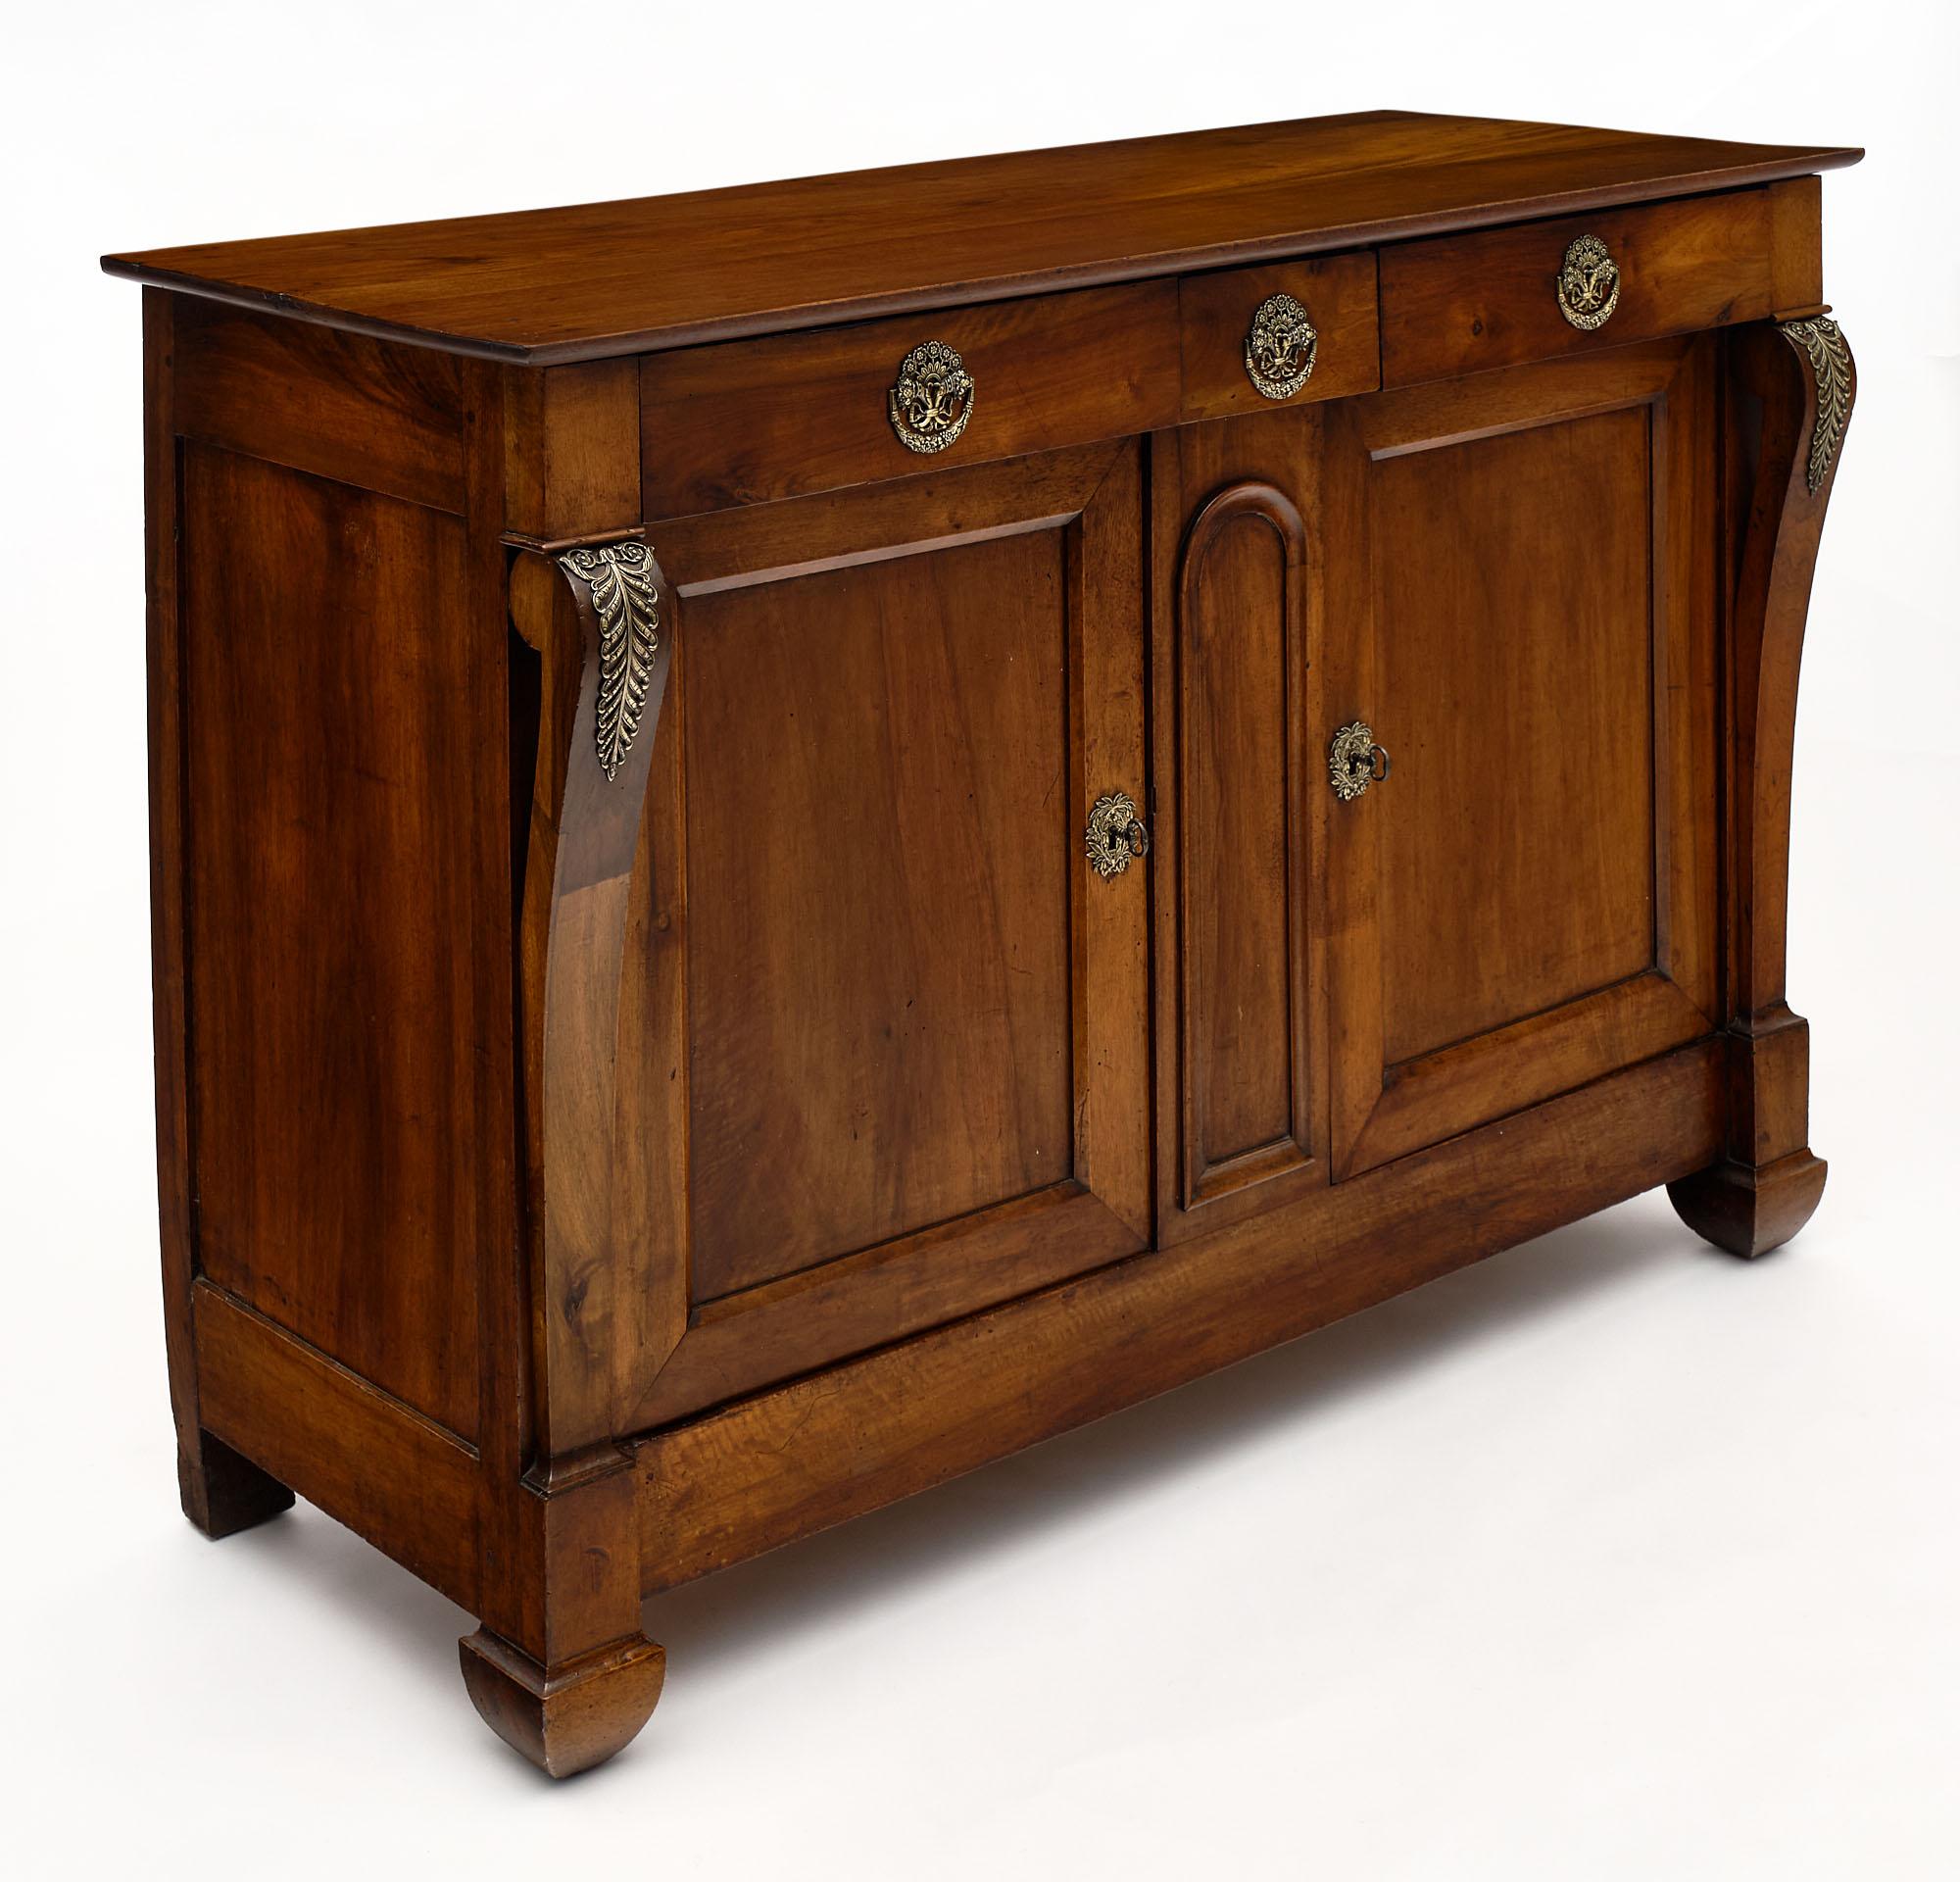 Buffet / credenza from France made of solid hand-carved walnut. It features carved “consoles” on the sides; two dovetailed drawers; and doors that open to interior shelving. There are richly cast period bronzes throughout and a working lock and key.